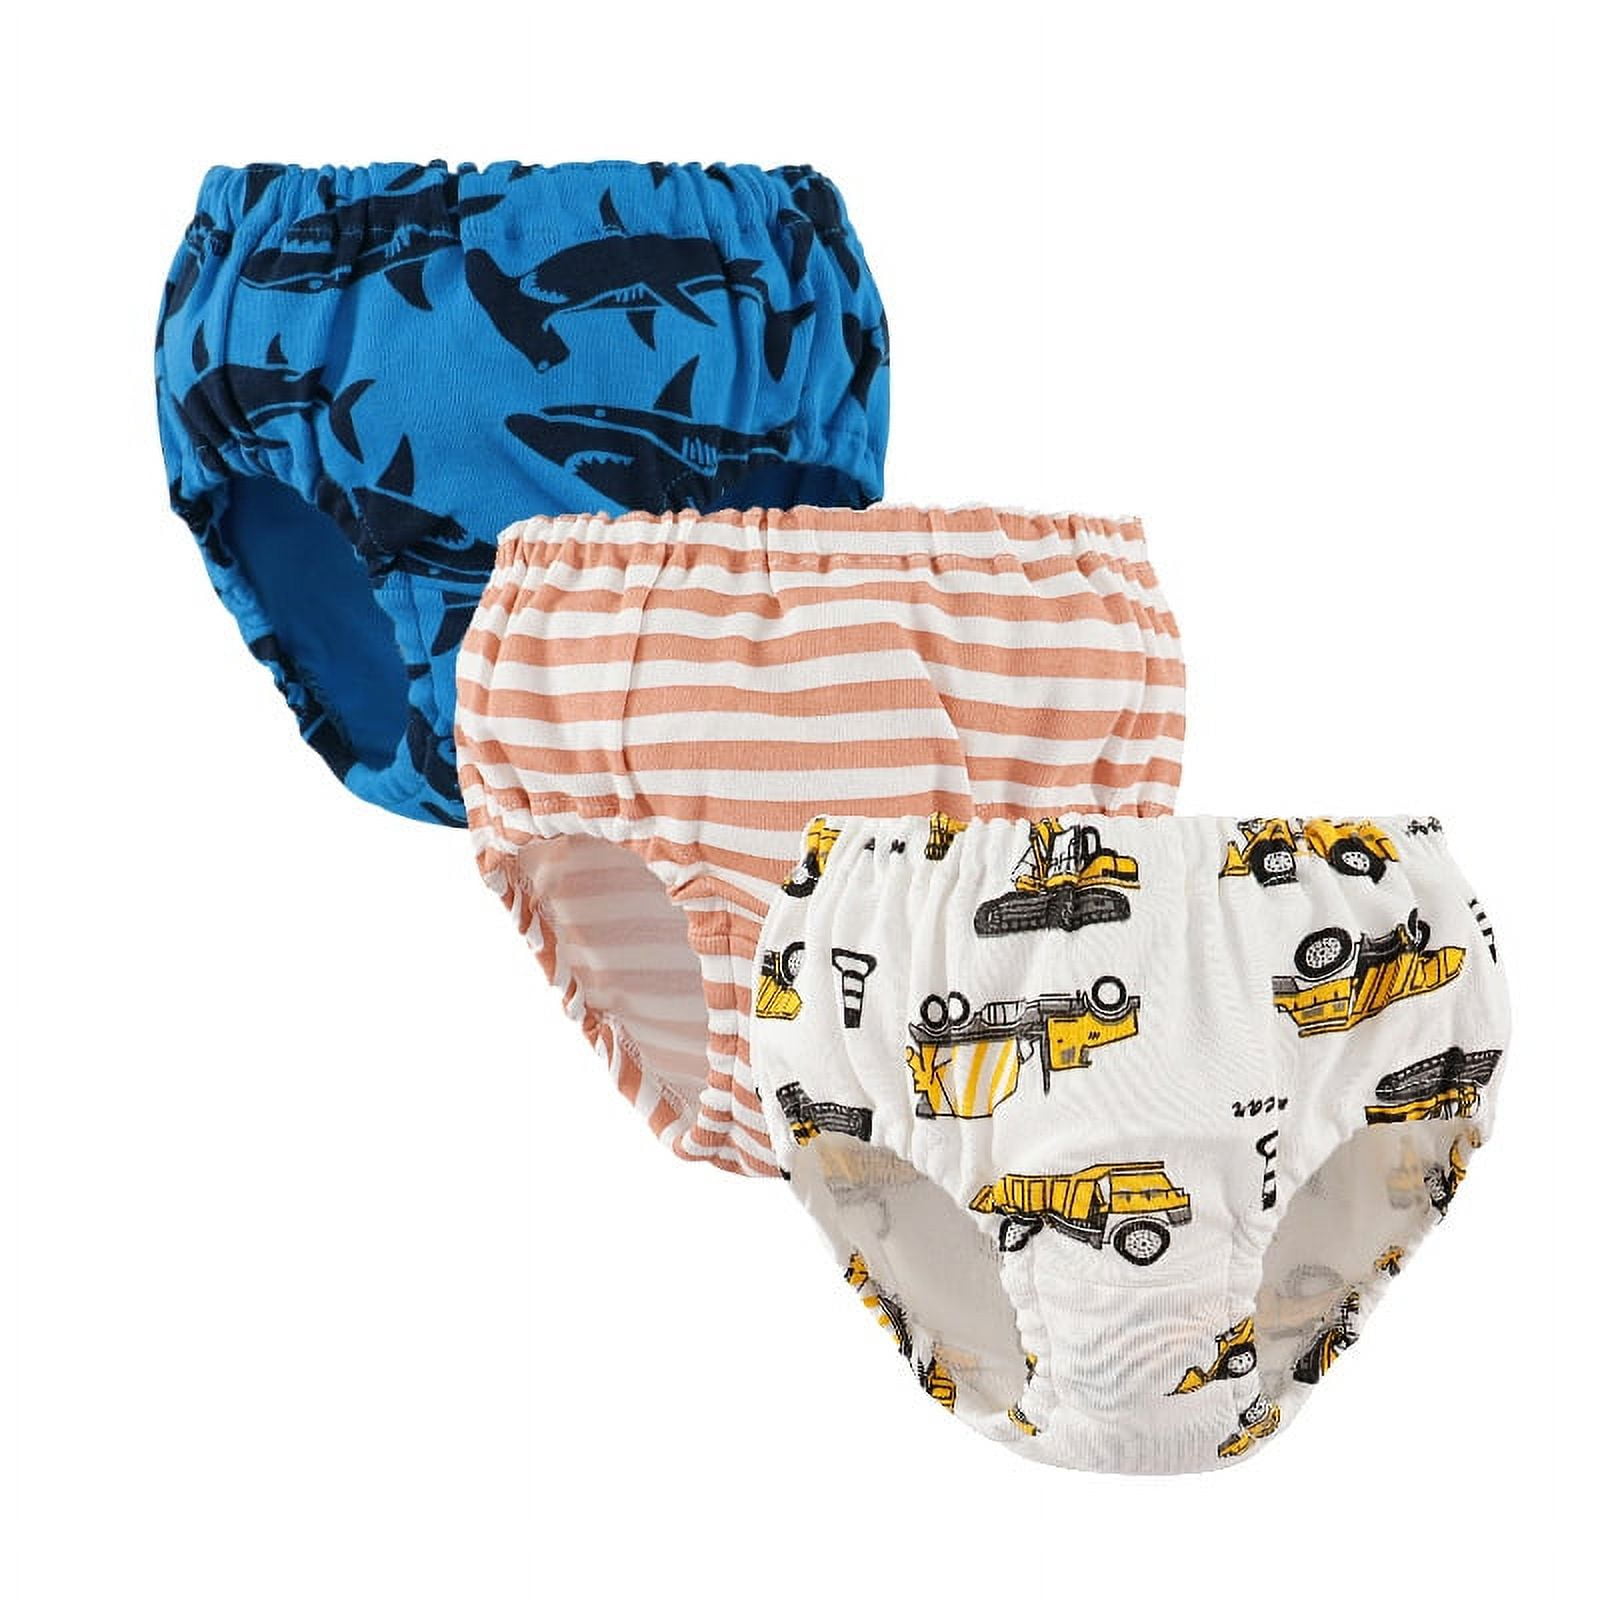 Toddler Plastic Training Pants Plastic Underwear Covers for Potty Training  Diaper Covers for Girls Rubber Pants for Toddlers Plastic Diaper Covers Rubber  Training Pants for Toddlers 5t 